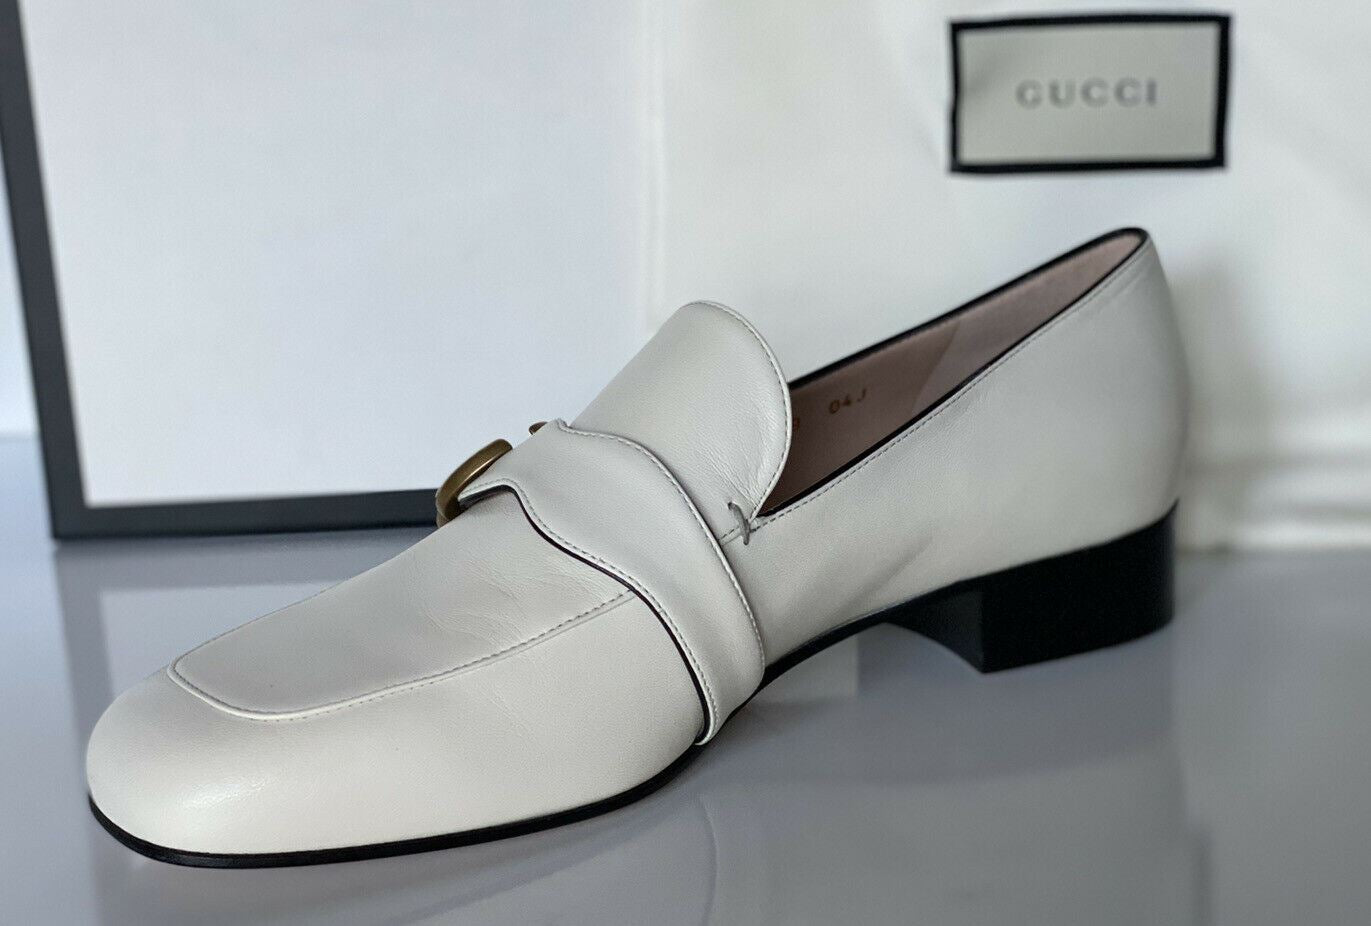 NIB Gucci Marmont Leather Mystic White Shoes 9 US (39 Euro) 602496 Italy